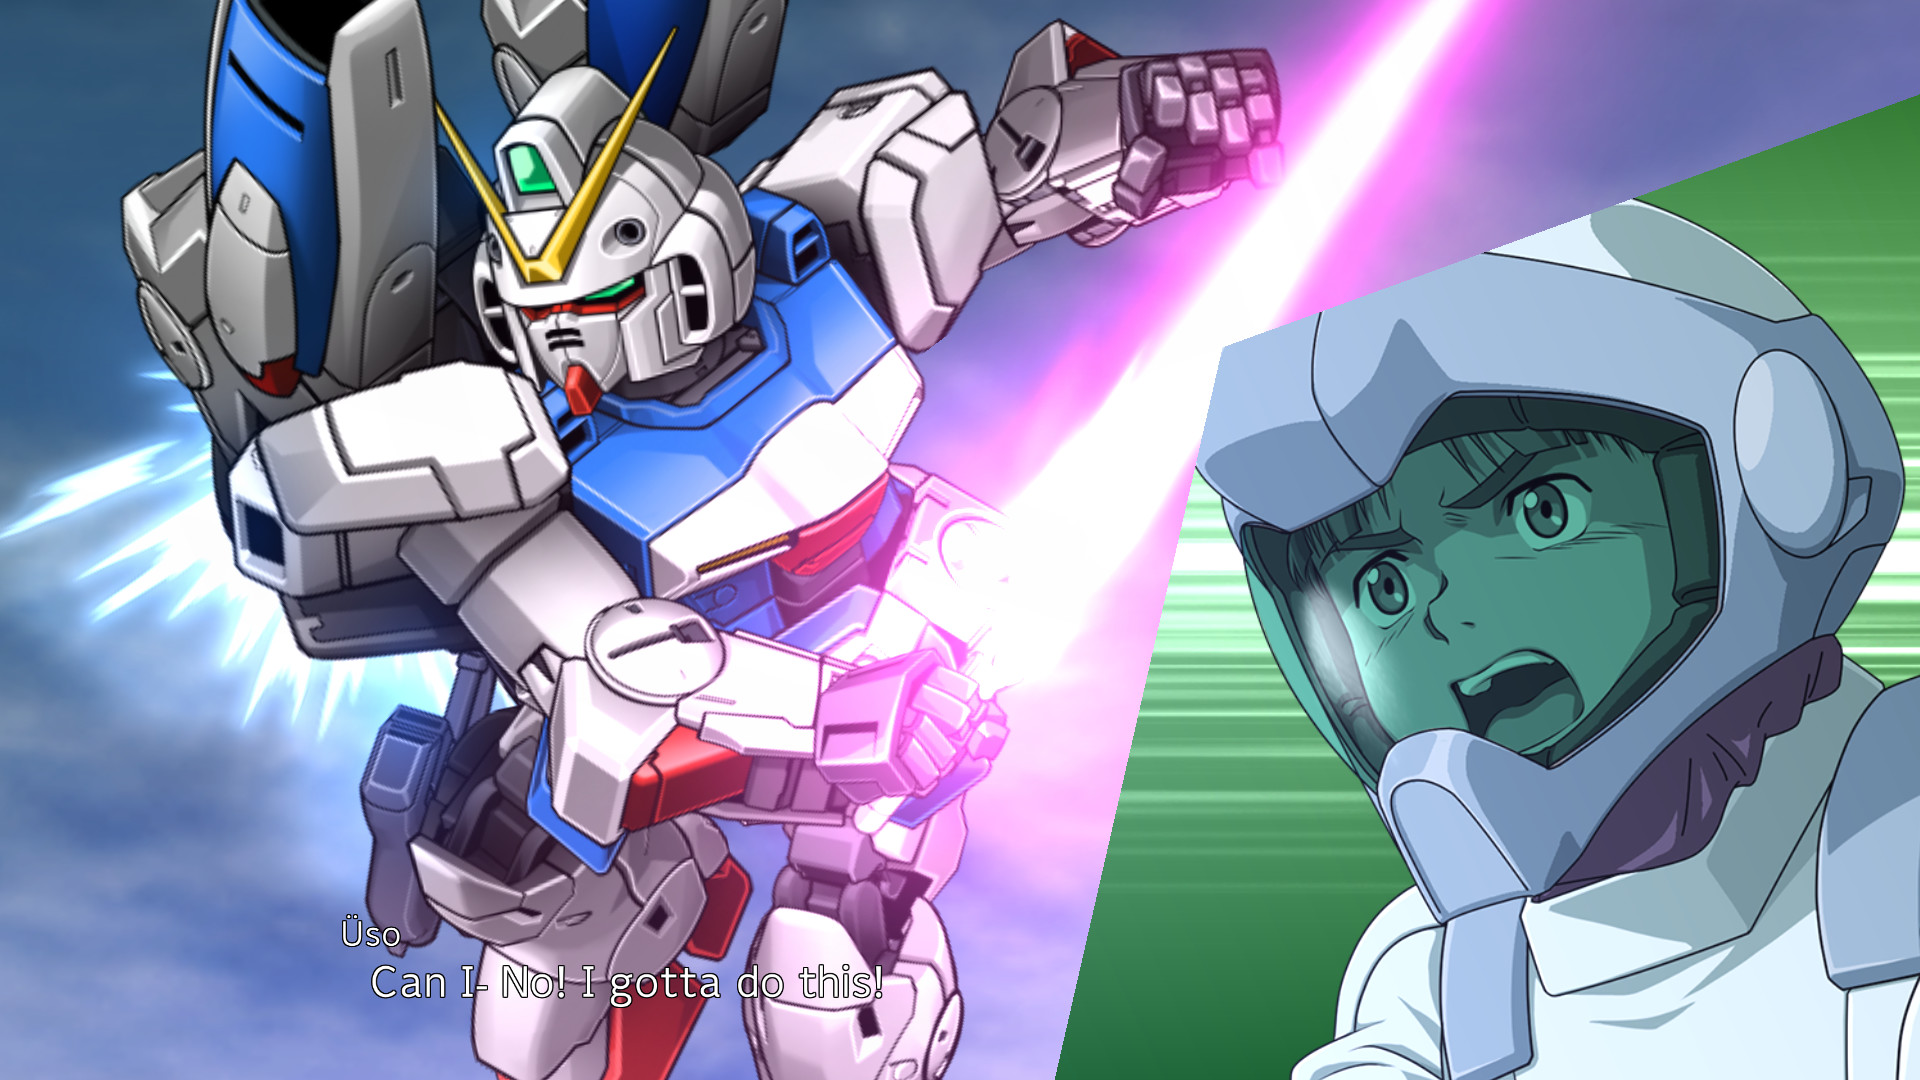 Super Robot Wars 30 Free Download for PC